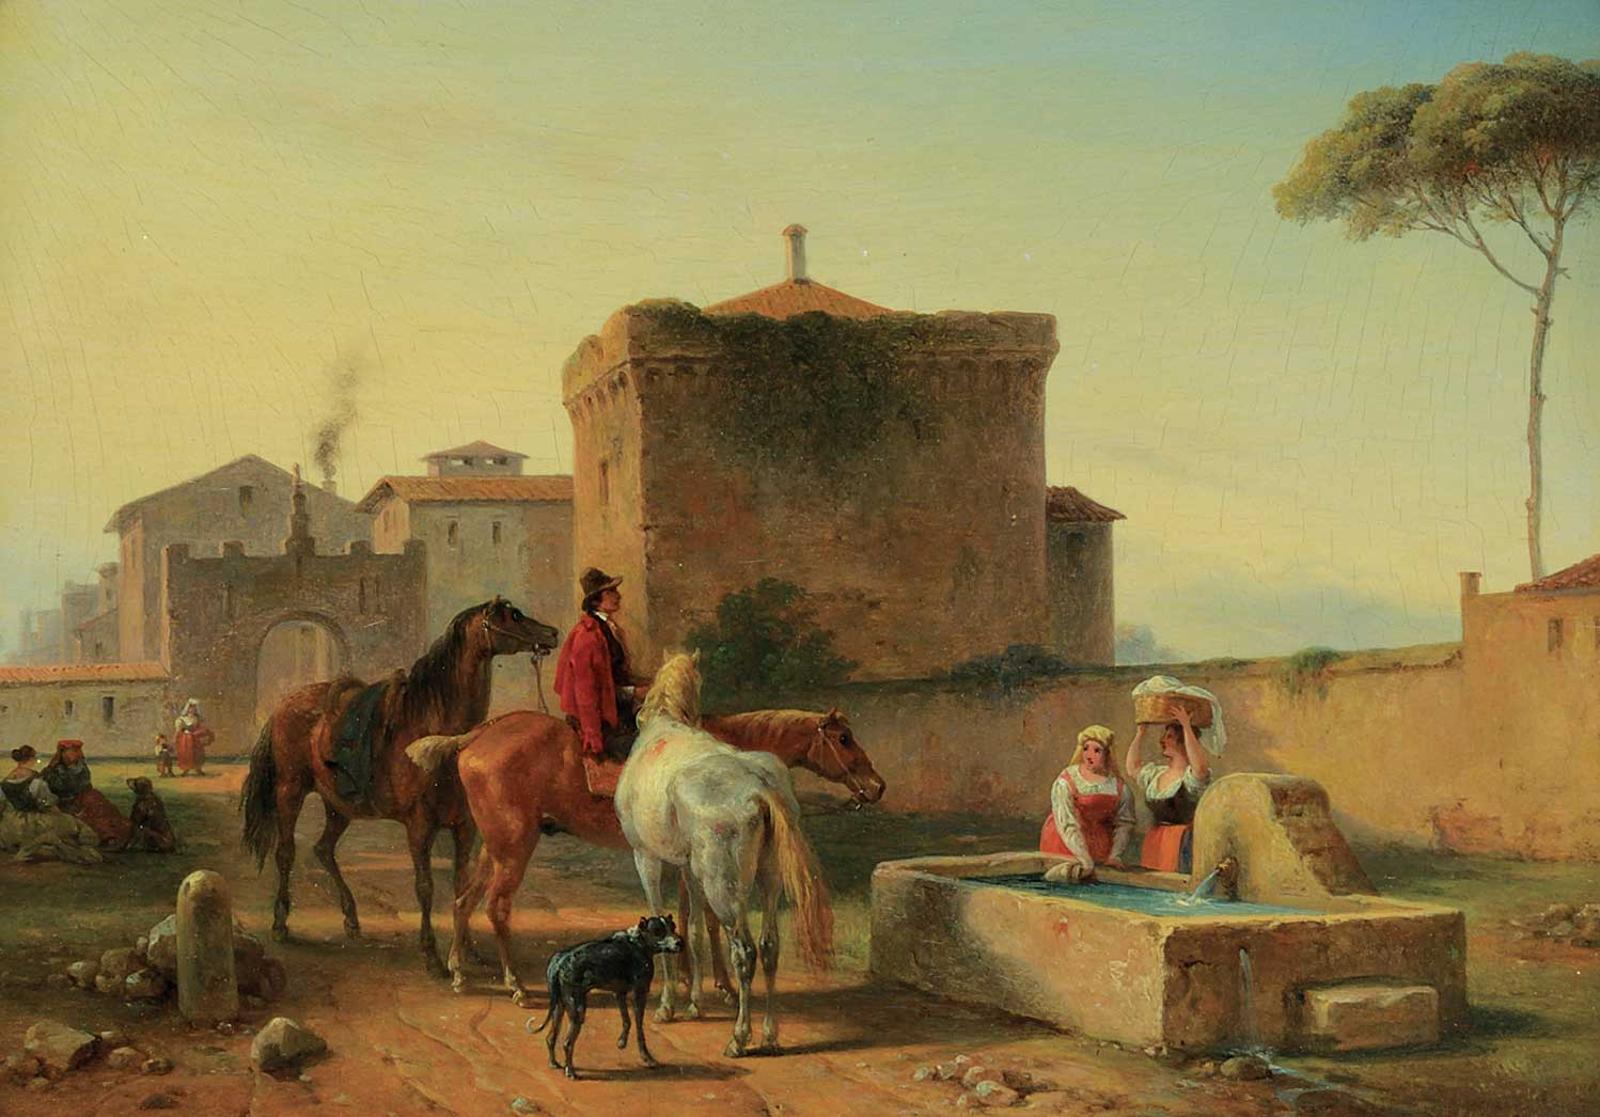 Guillaume Frederic Ronmy - Untitled - At the Watering Trough